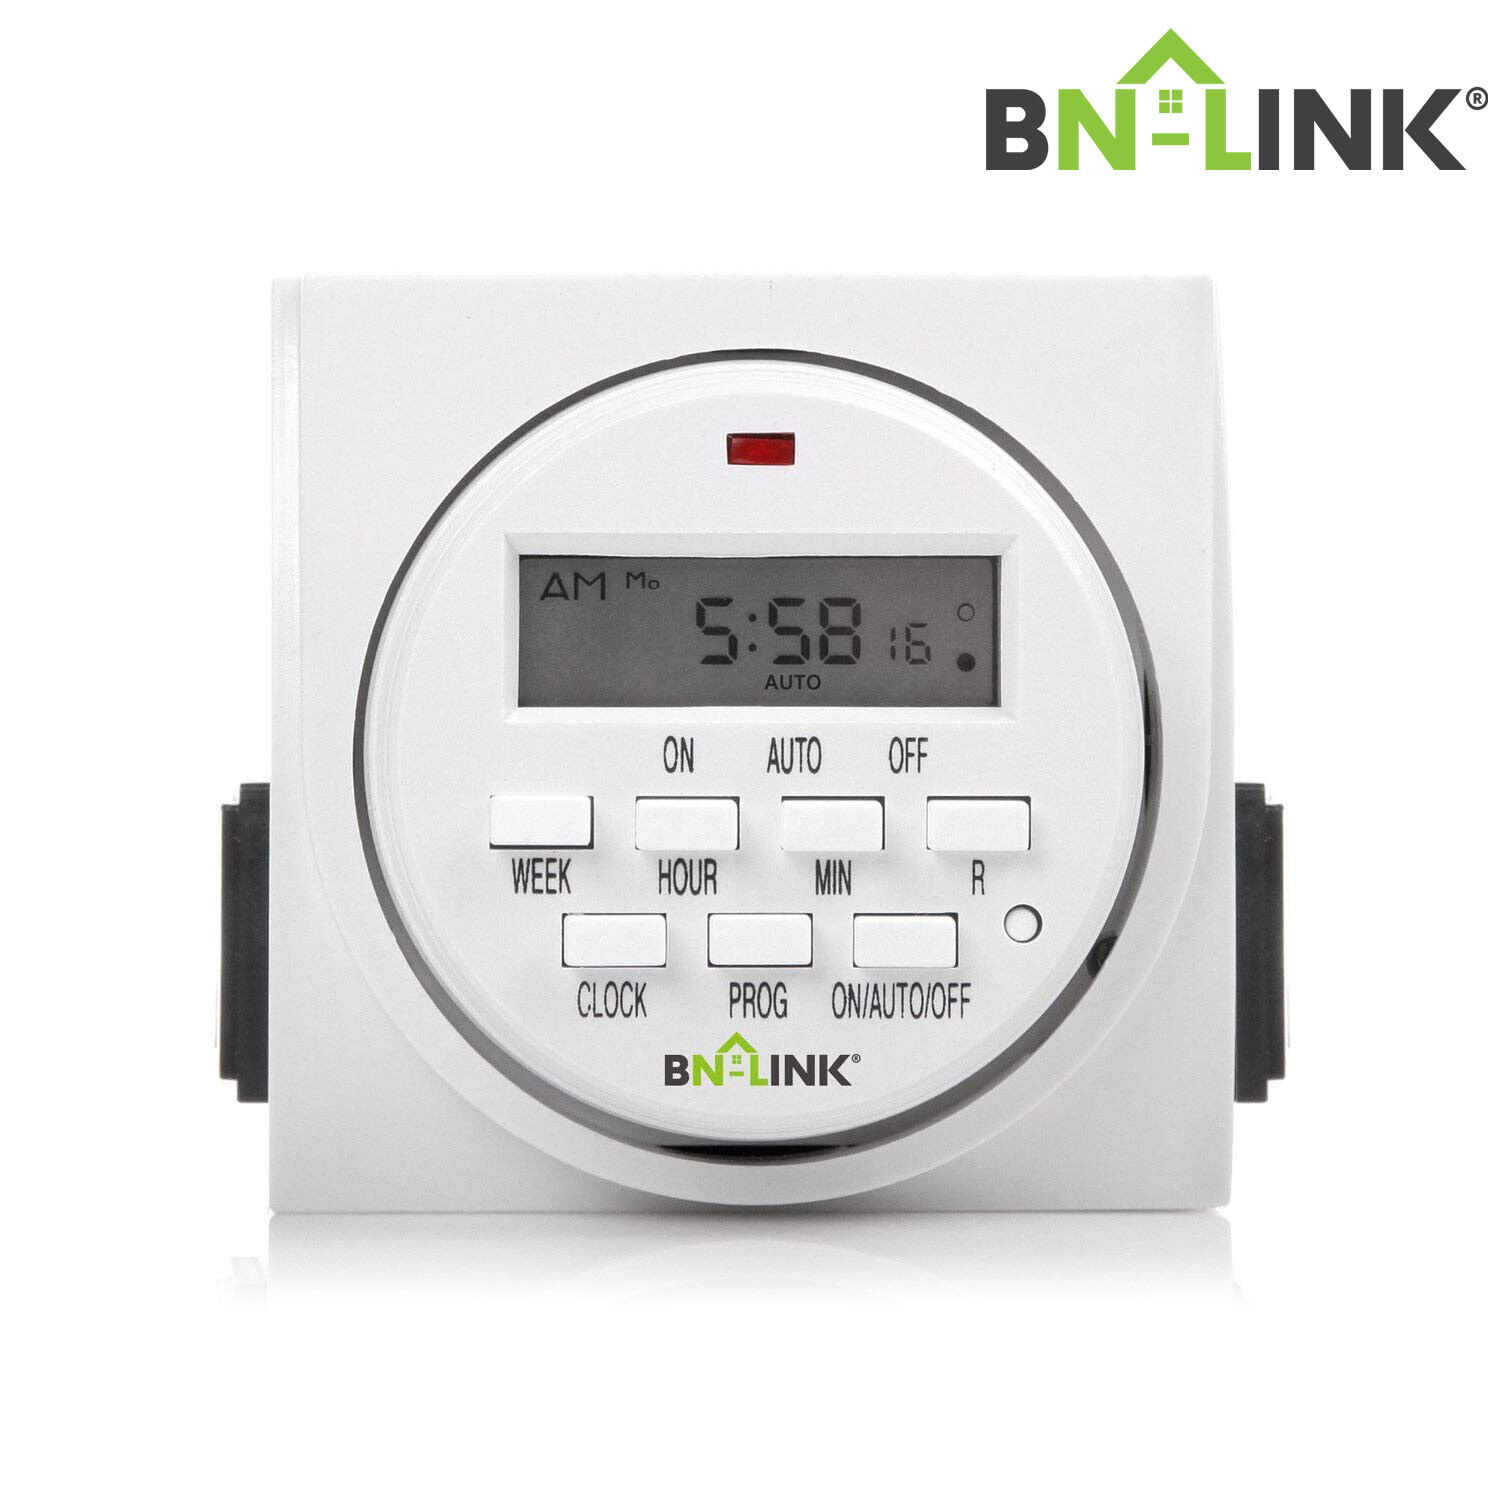 BN-LINK Heavy Duty Digital Electric Programmable Dual Outlet Timer Plug Indoor